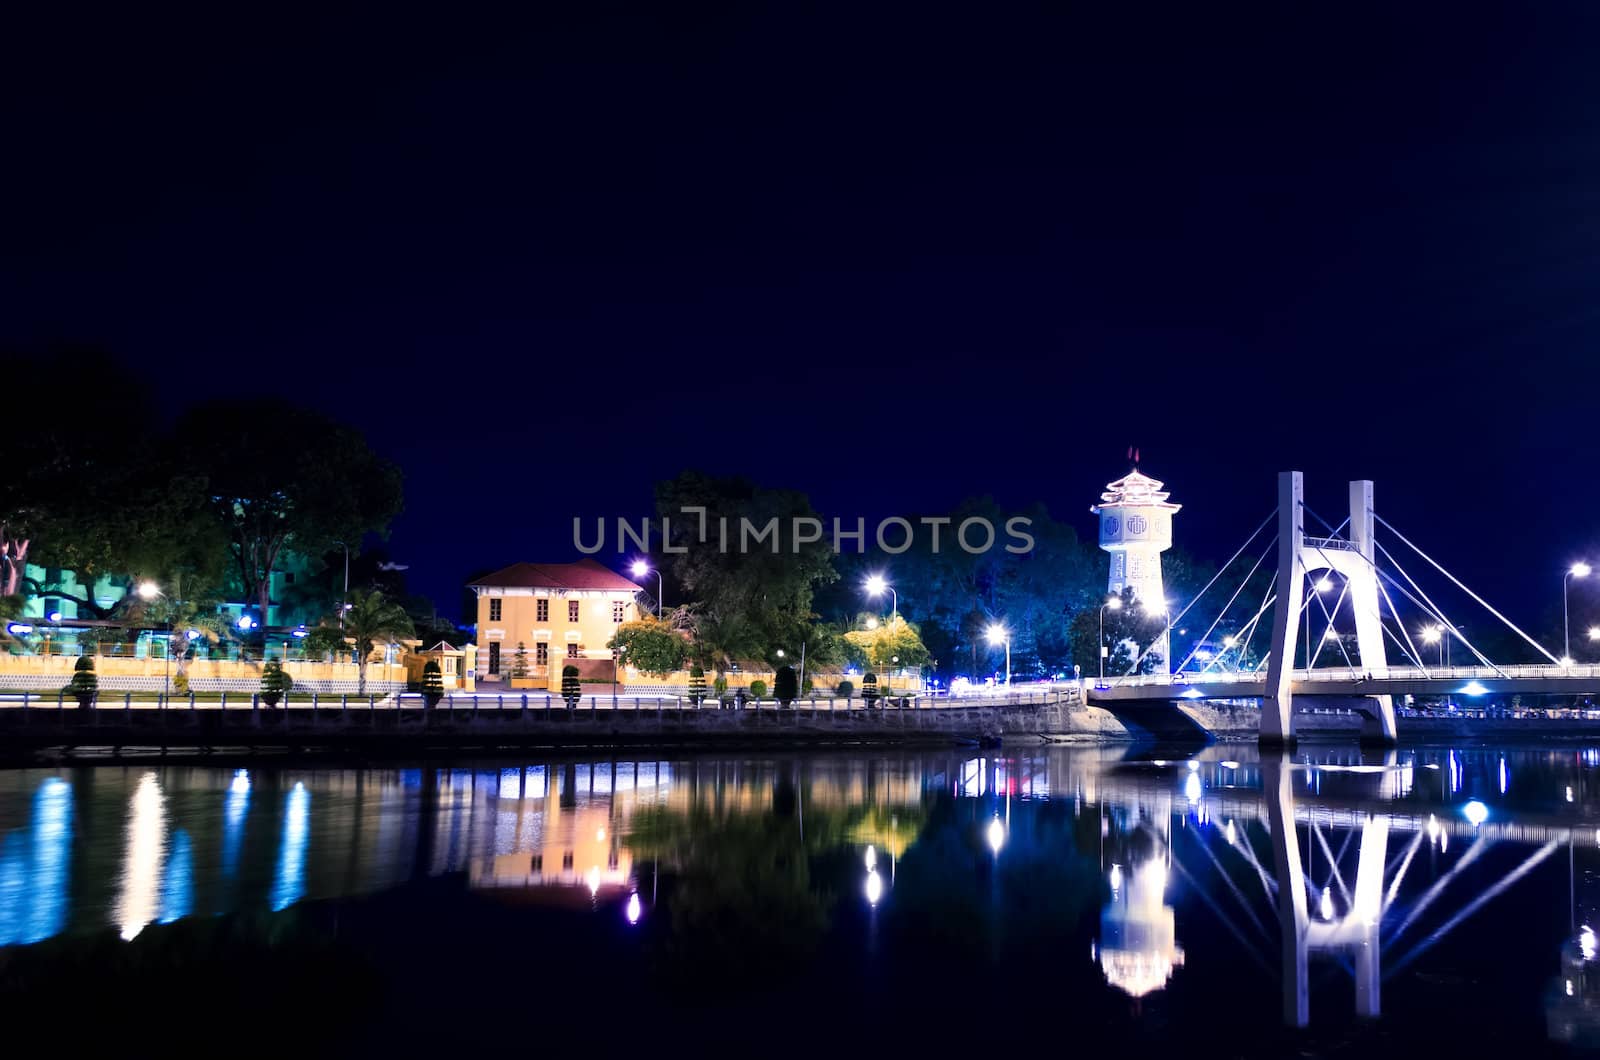 Phan Thiet Water Tower on Ca Ty River at Evening. by GNNick